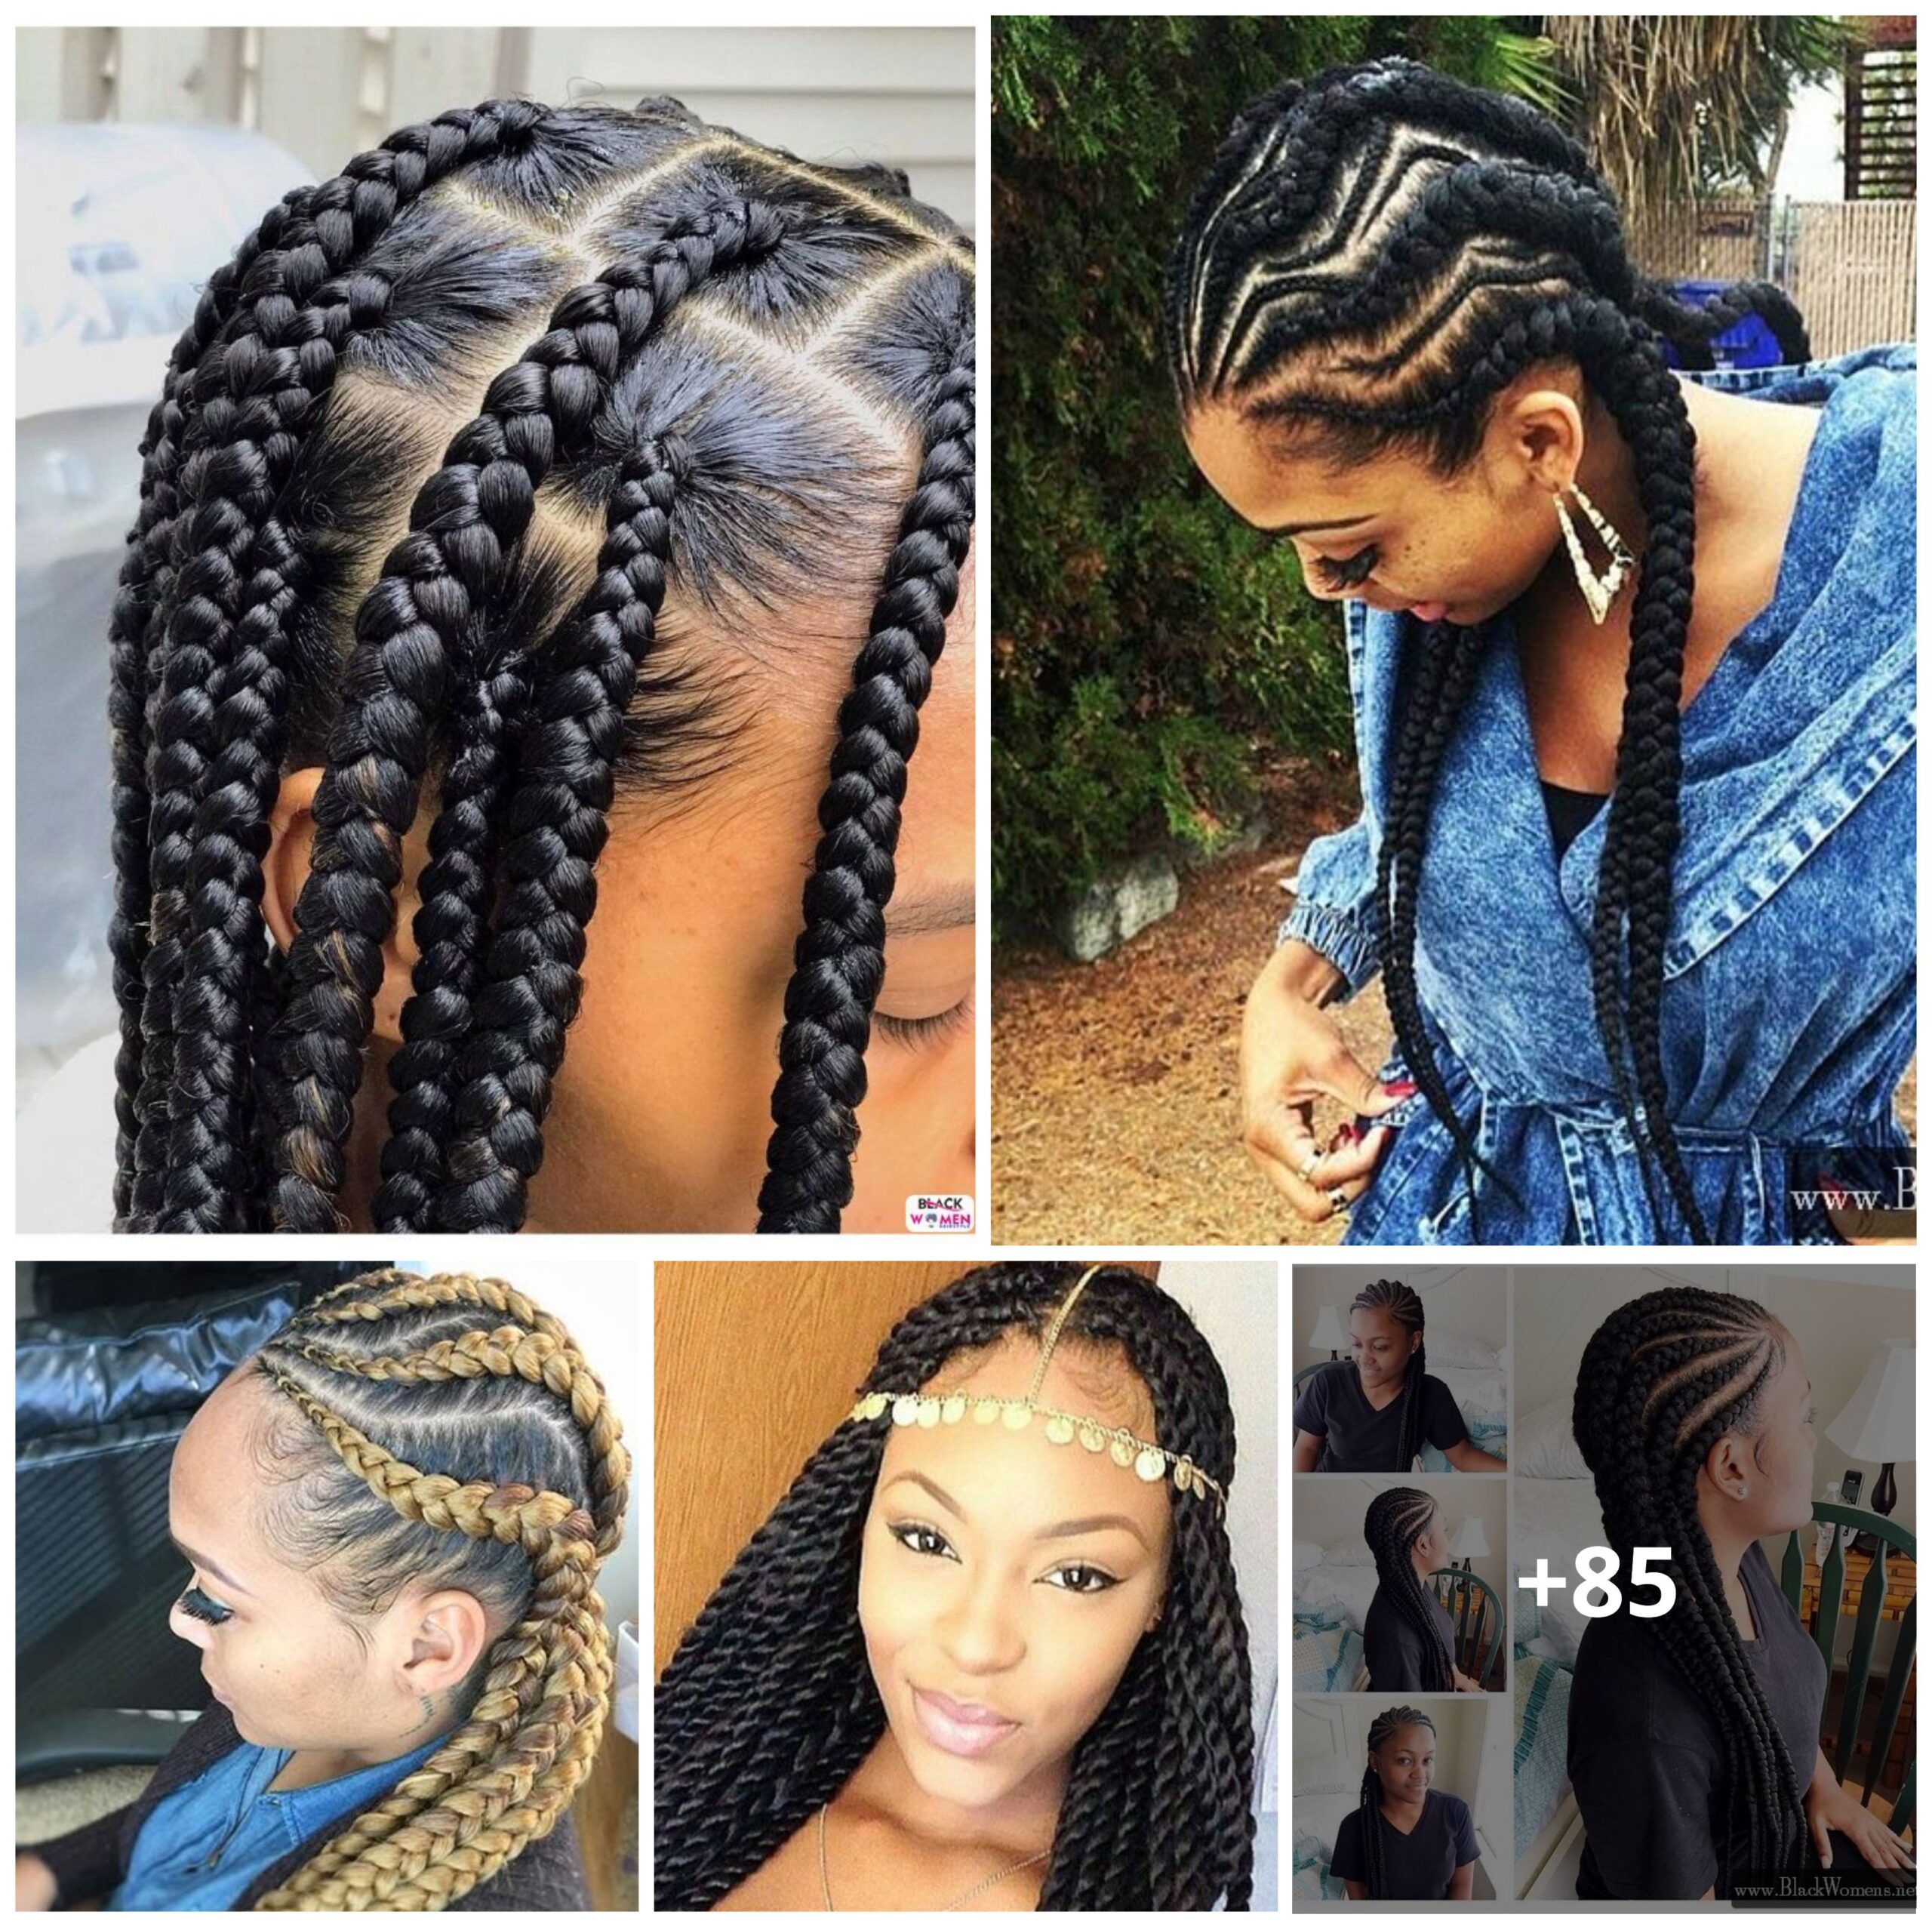 85 PHOTOS: Find the Amazing Hairstyle for Women